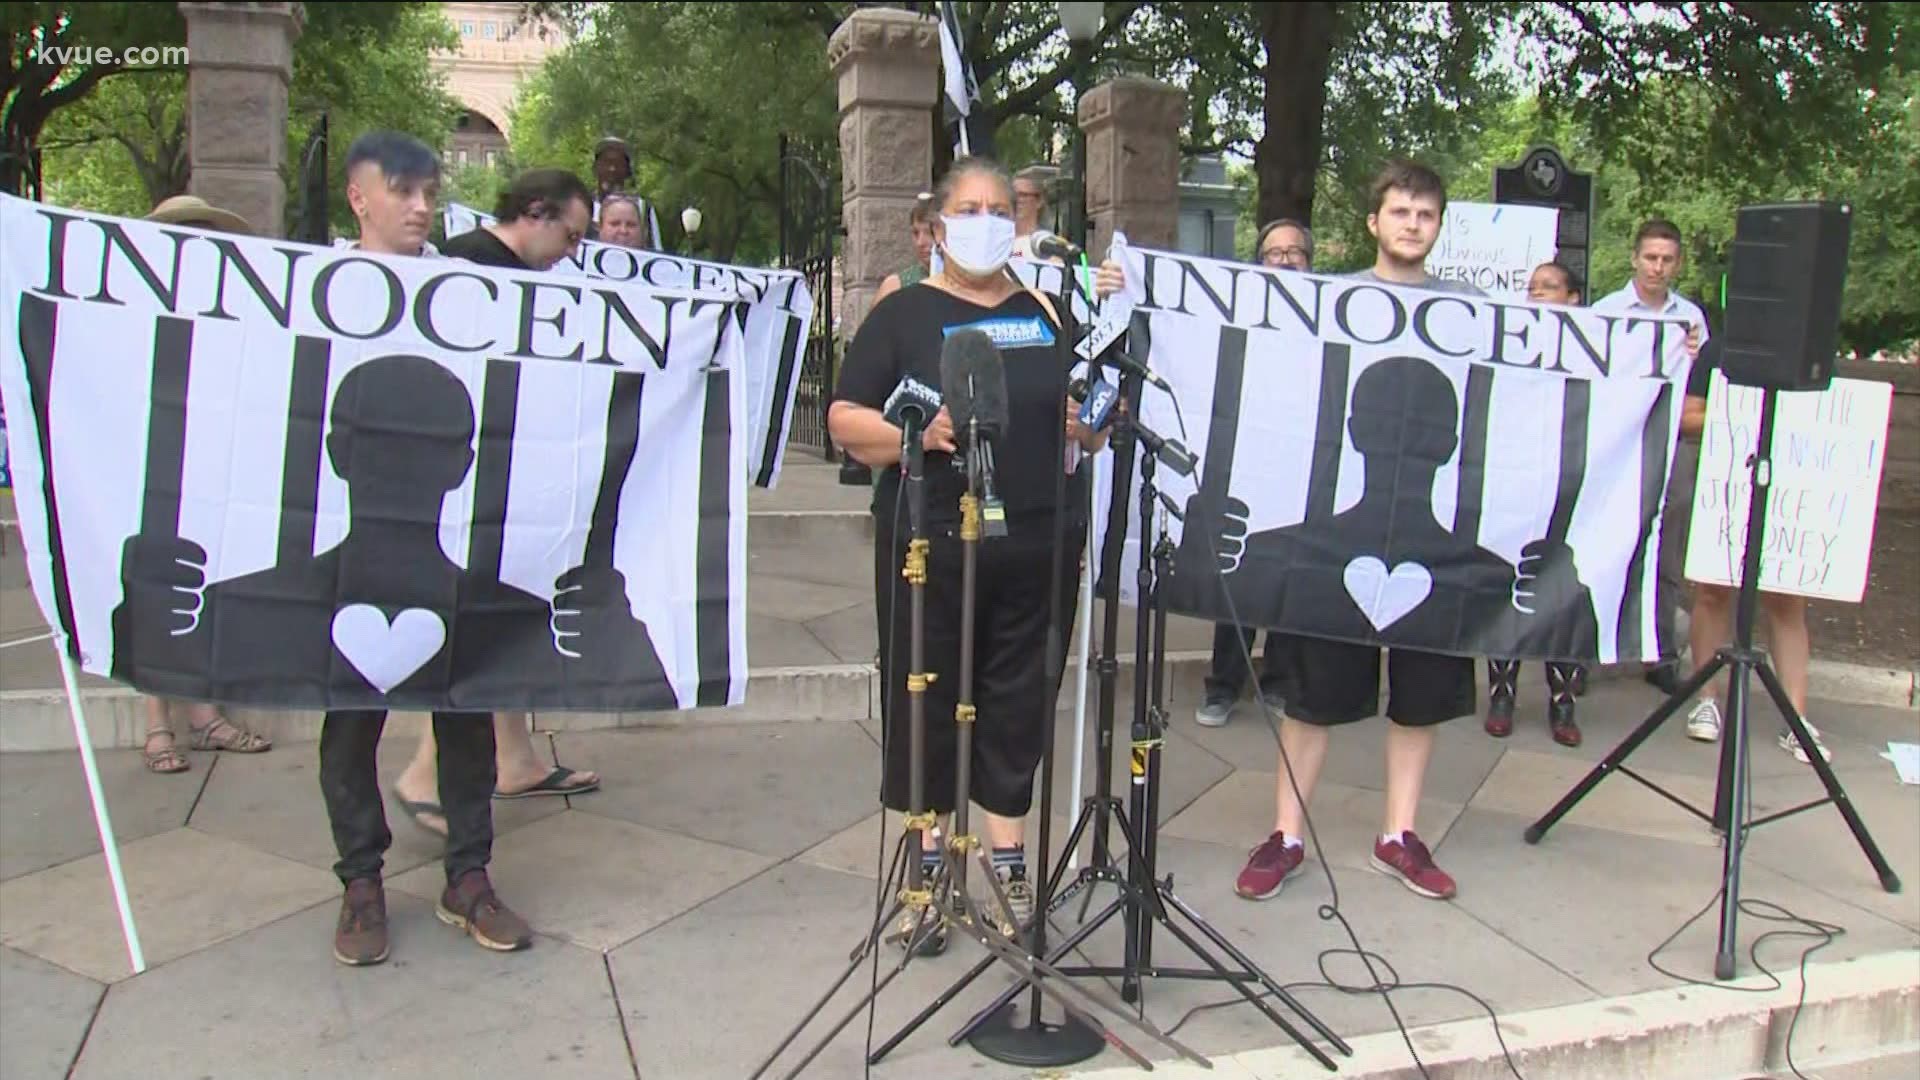 Organizers said the event was scheduled to coincide with Independence Day weekend as they demand Reed’s freedom.